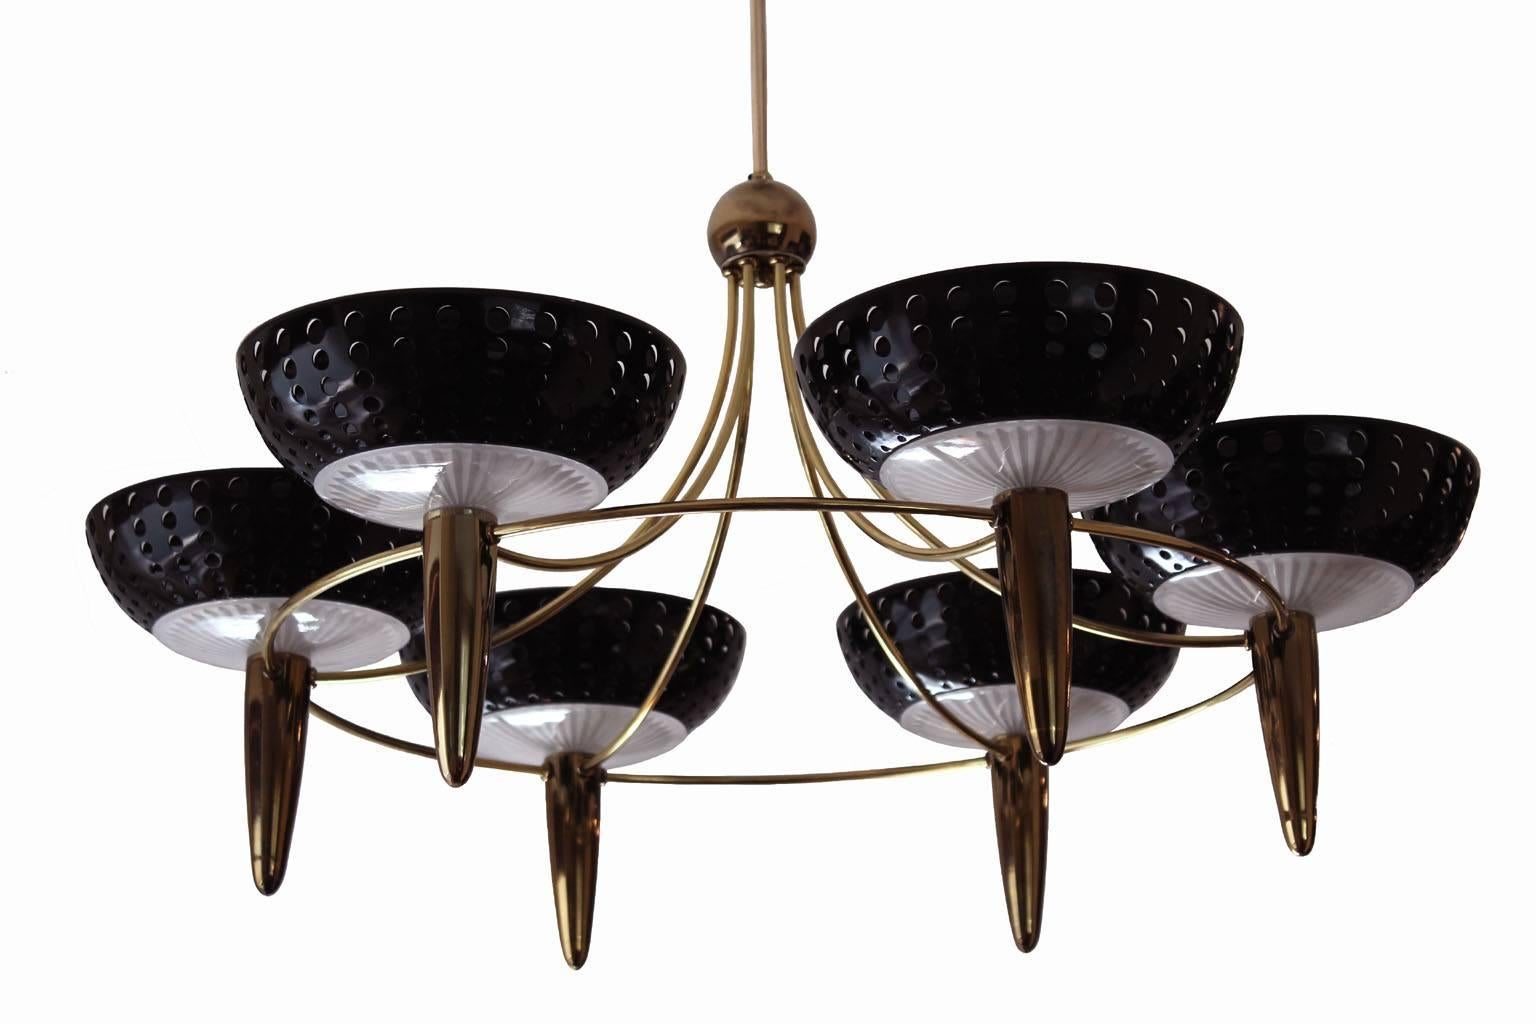 A rare and very exclusive six-branch brass chandelier designed by Gerald Thurston for Lightolier. Many of Thurston's designs were inspired by Lightolier's affiliation with Arteluce, the Italian company founded by lighting pioneer Gino Sarfatti. As